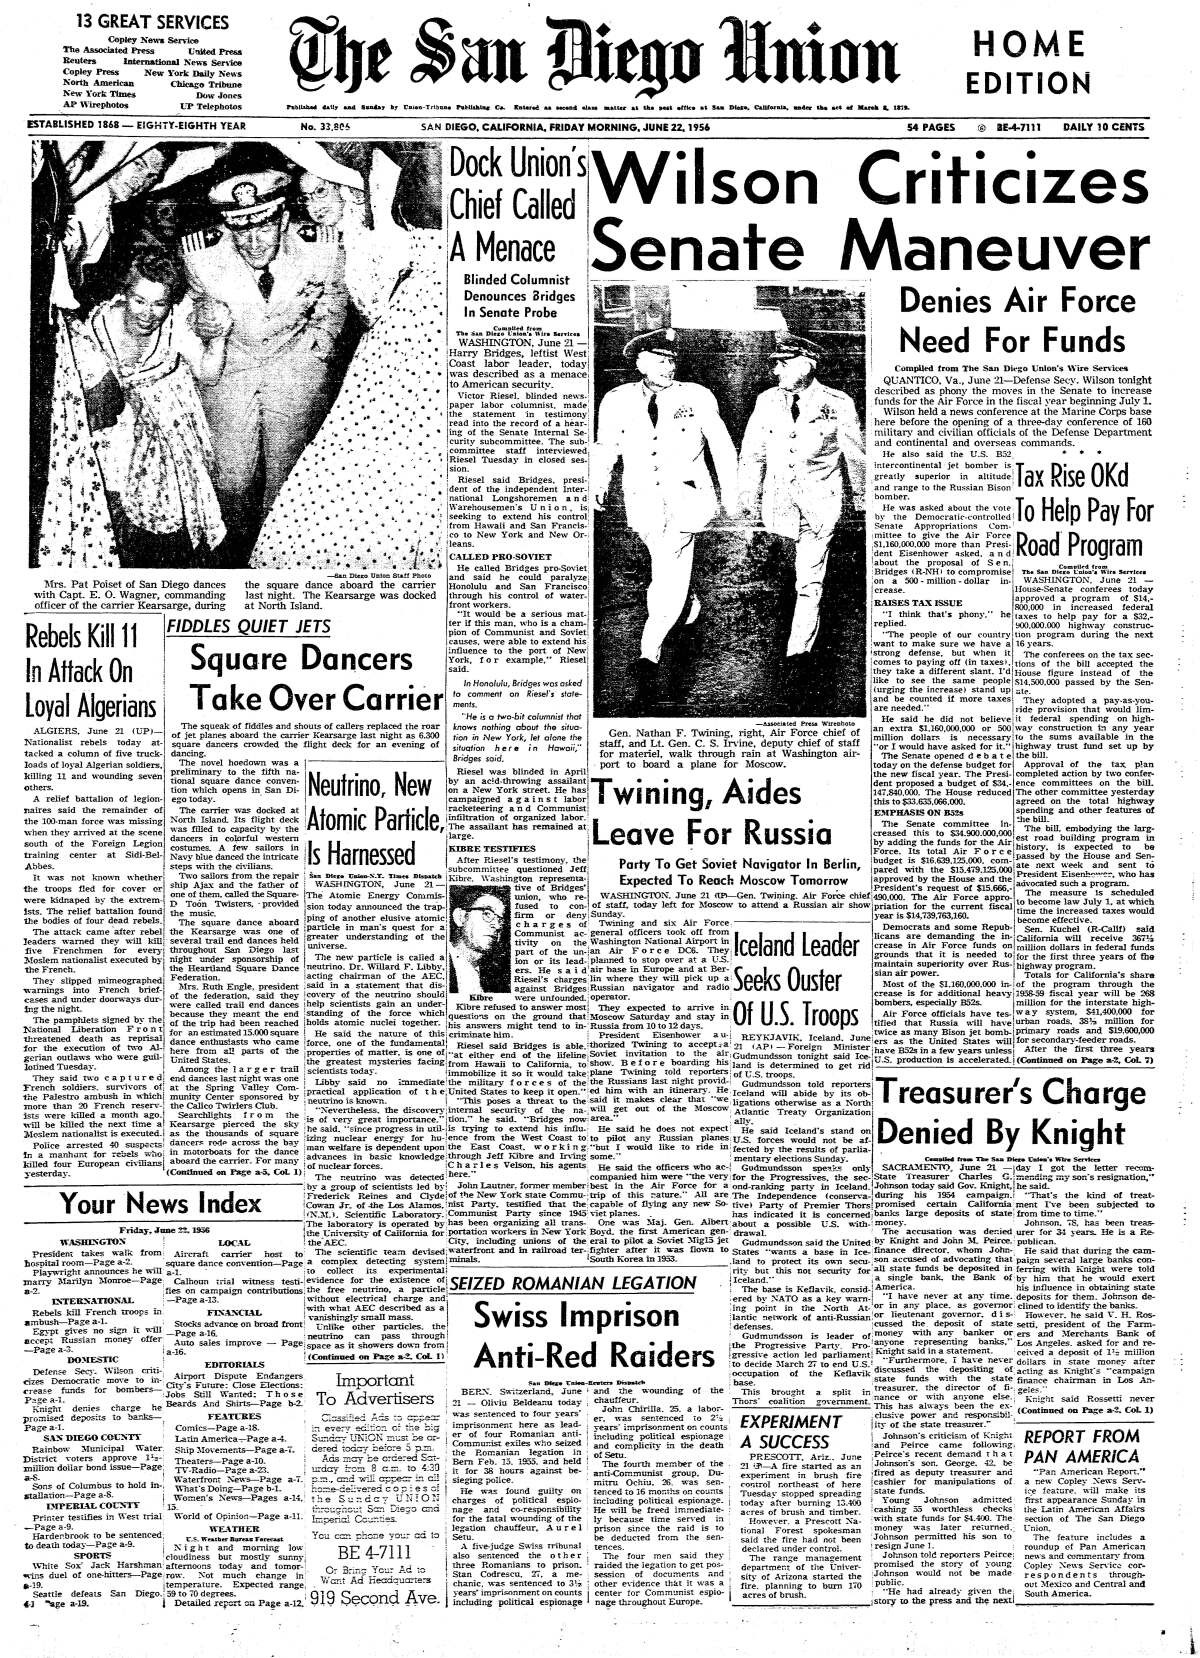 June 22, 1956 front page of The San Diego Union.